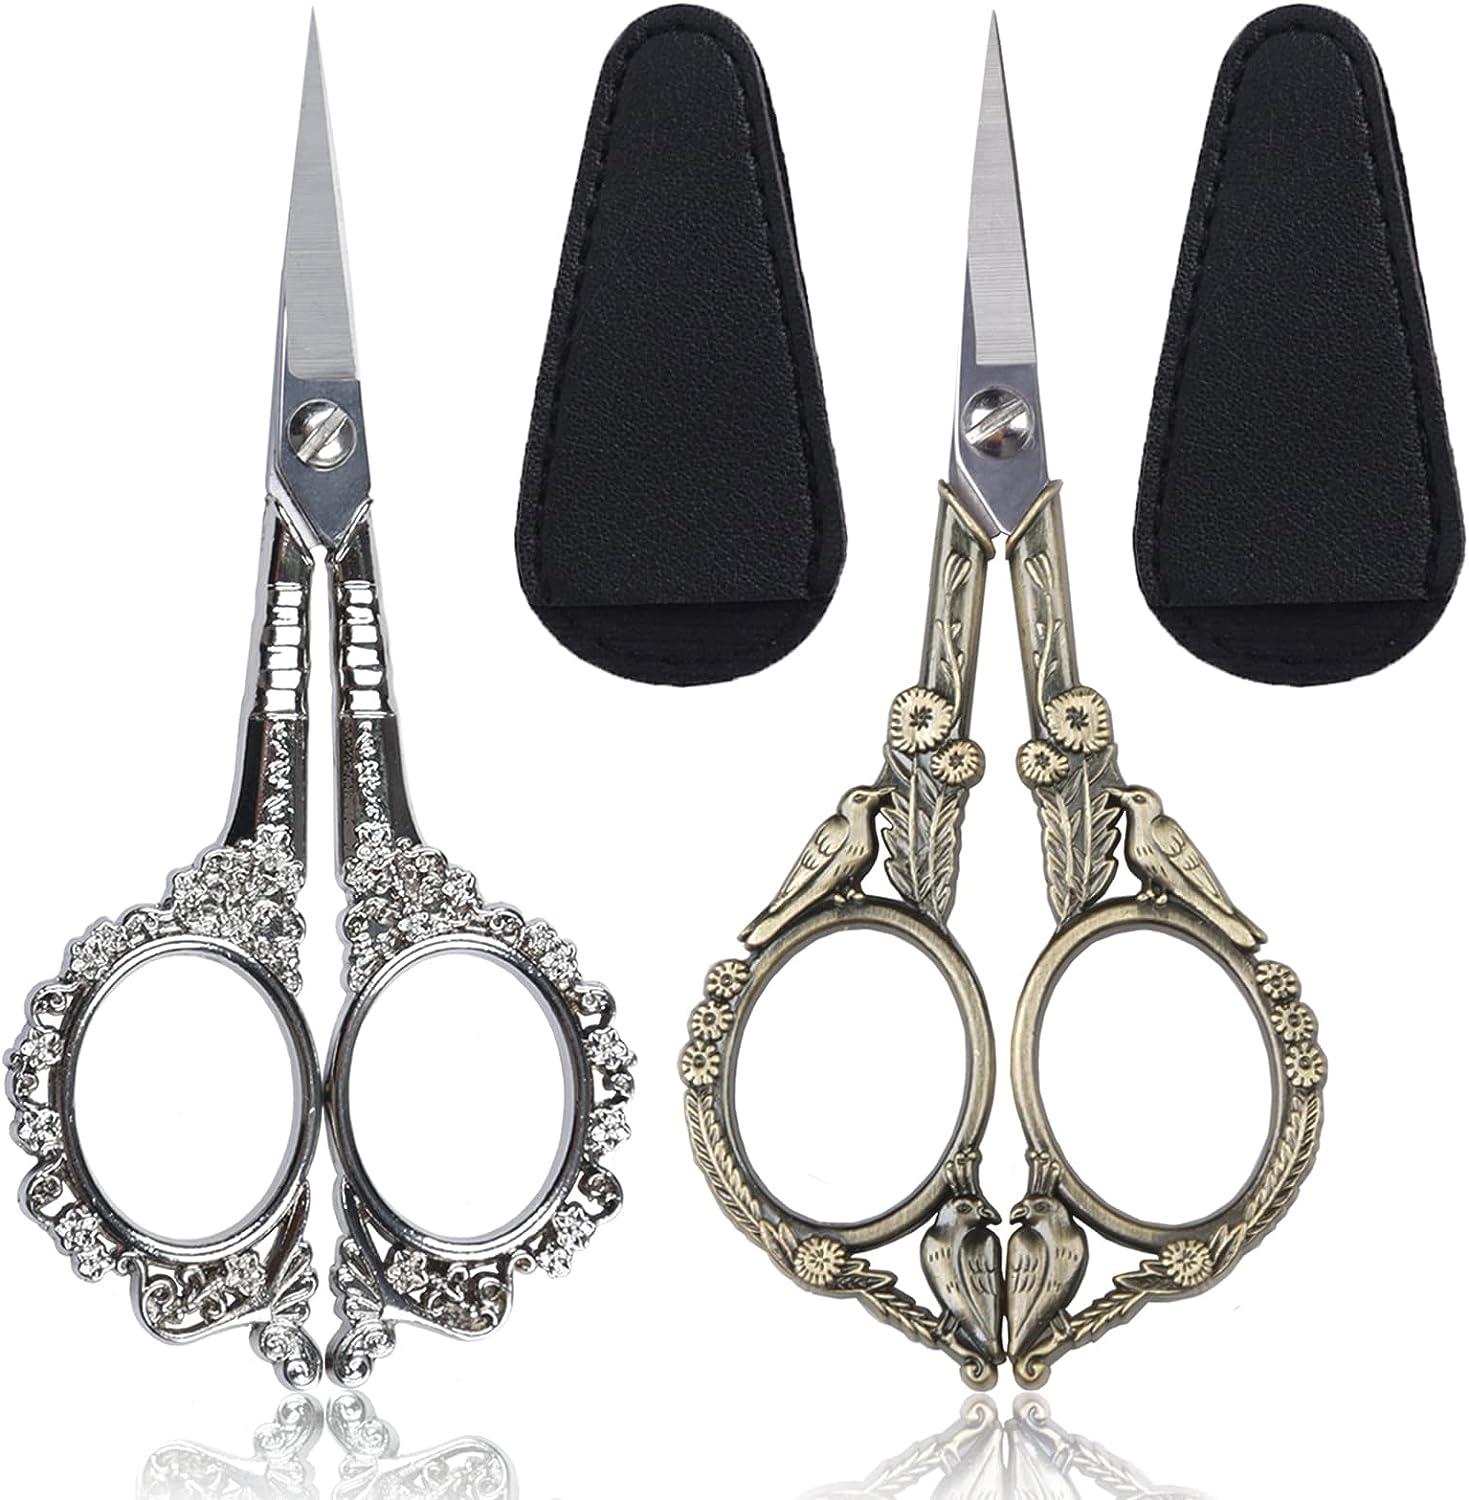 Small Sharp Scissors For Sewing Embroidery Crafts 4.5 Stainless Steel  Straight 